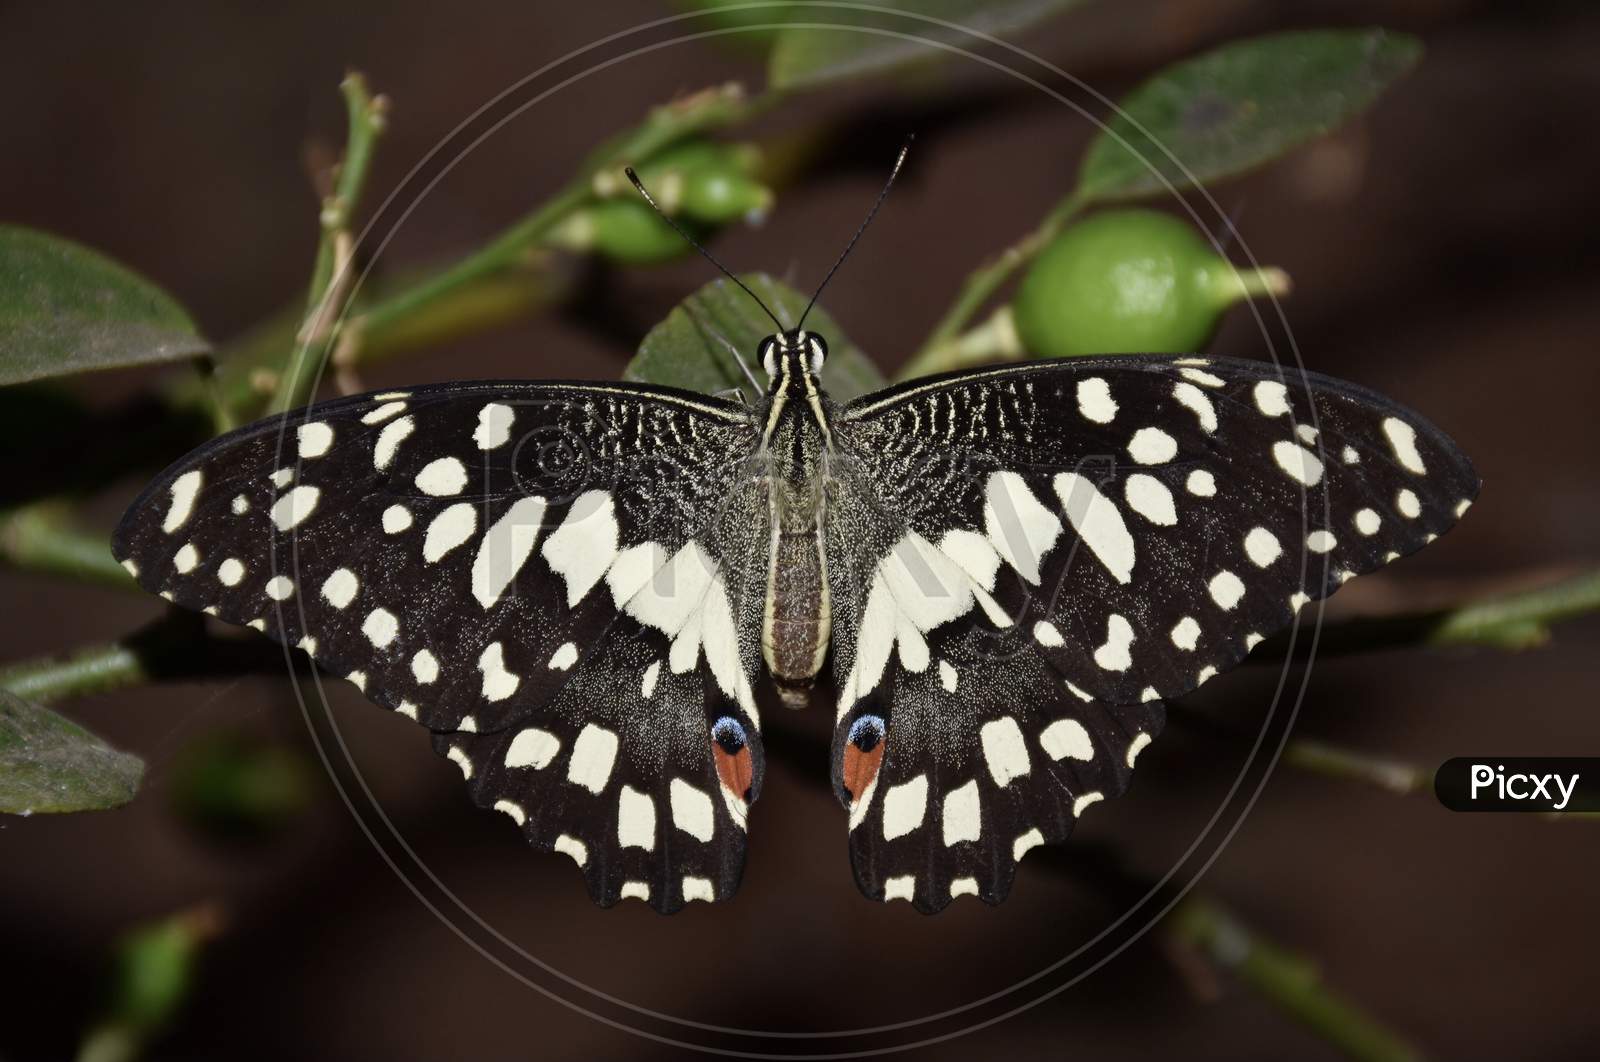 Lime Butterfly Or Lemon Butterfly (Papilio Demoleus) Is A Common And Widespread Swallowtail Butterfly